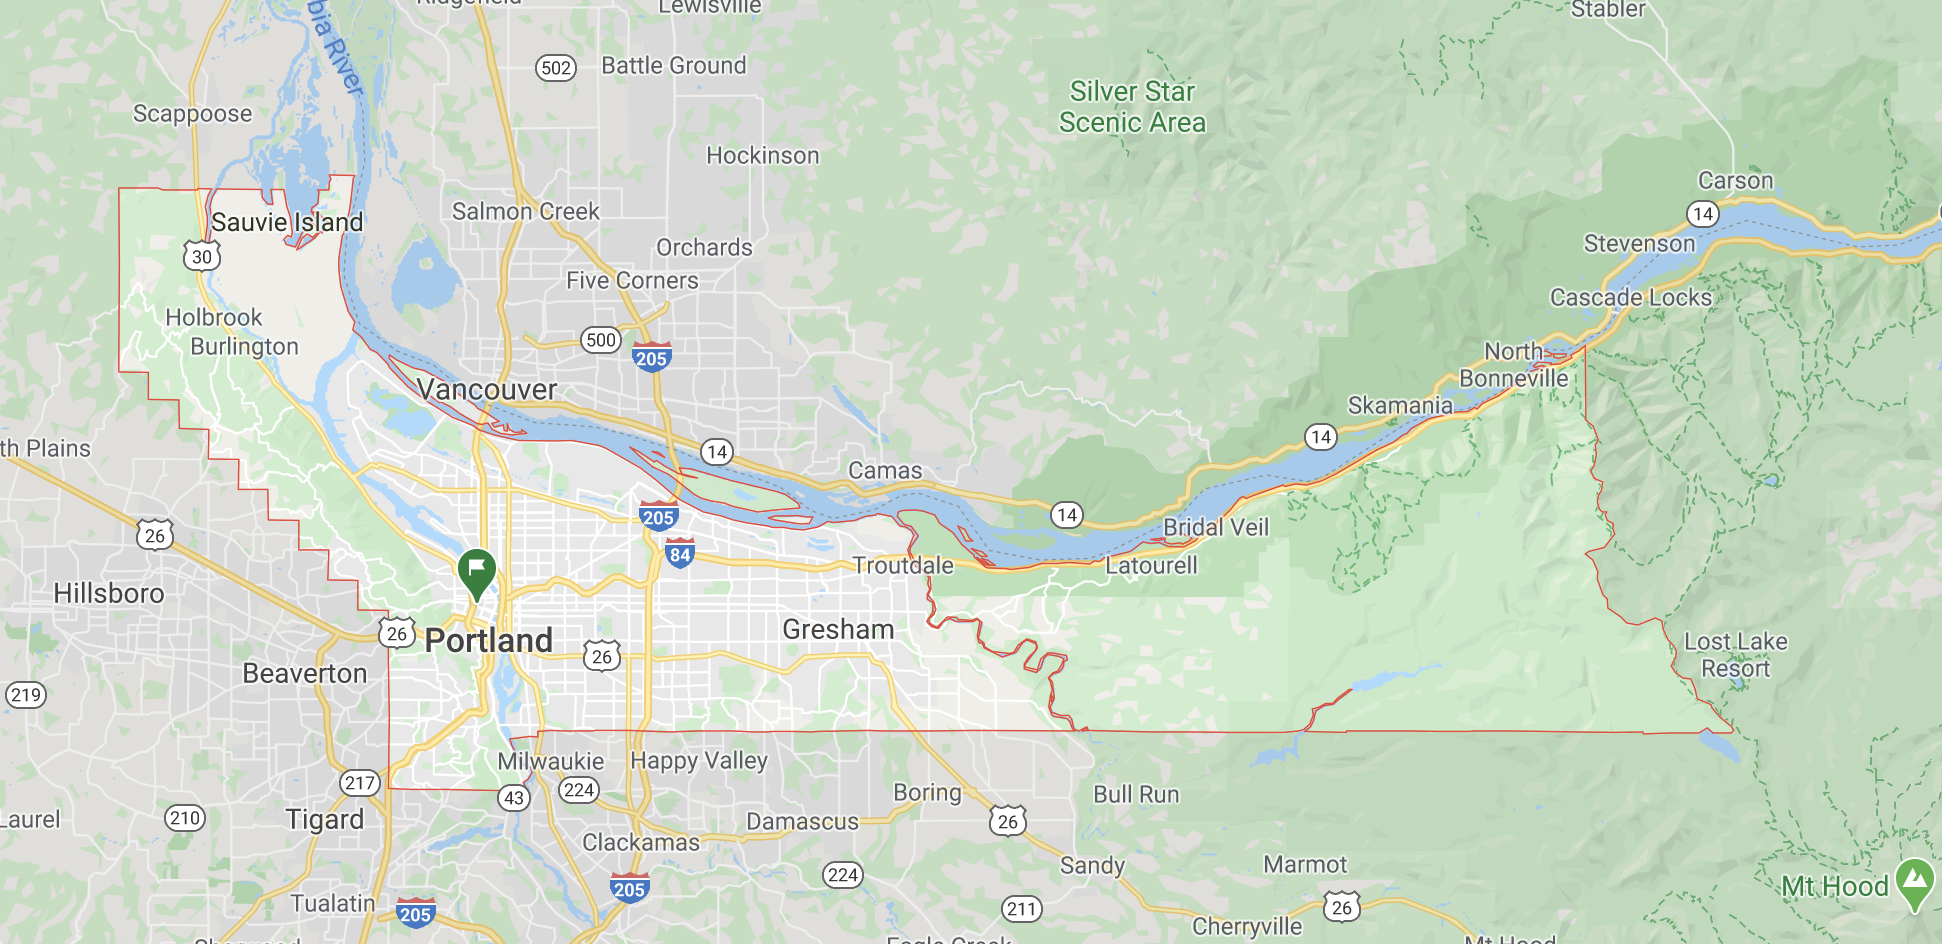 Multnomah County, Oregon's most populated county includes Portland, Gresham, and Troutdale. (image courtesy of Google)